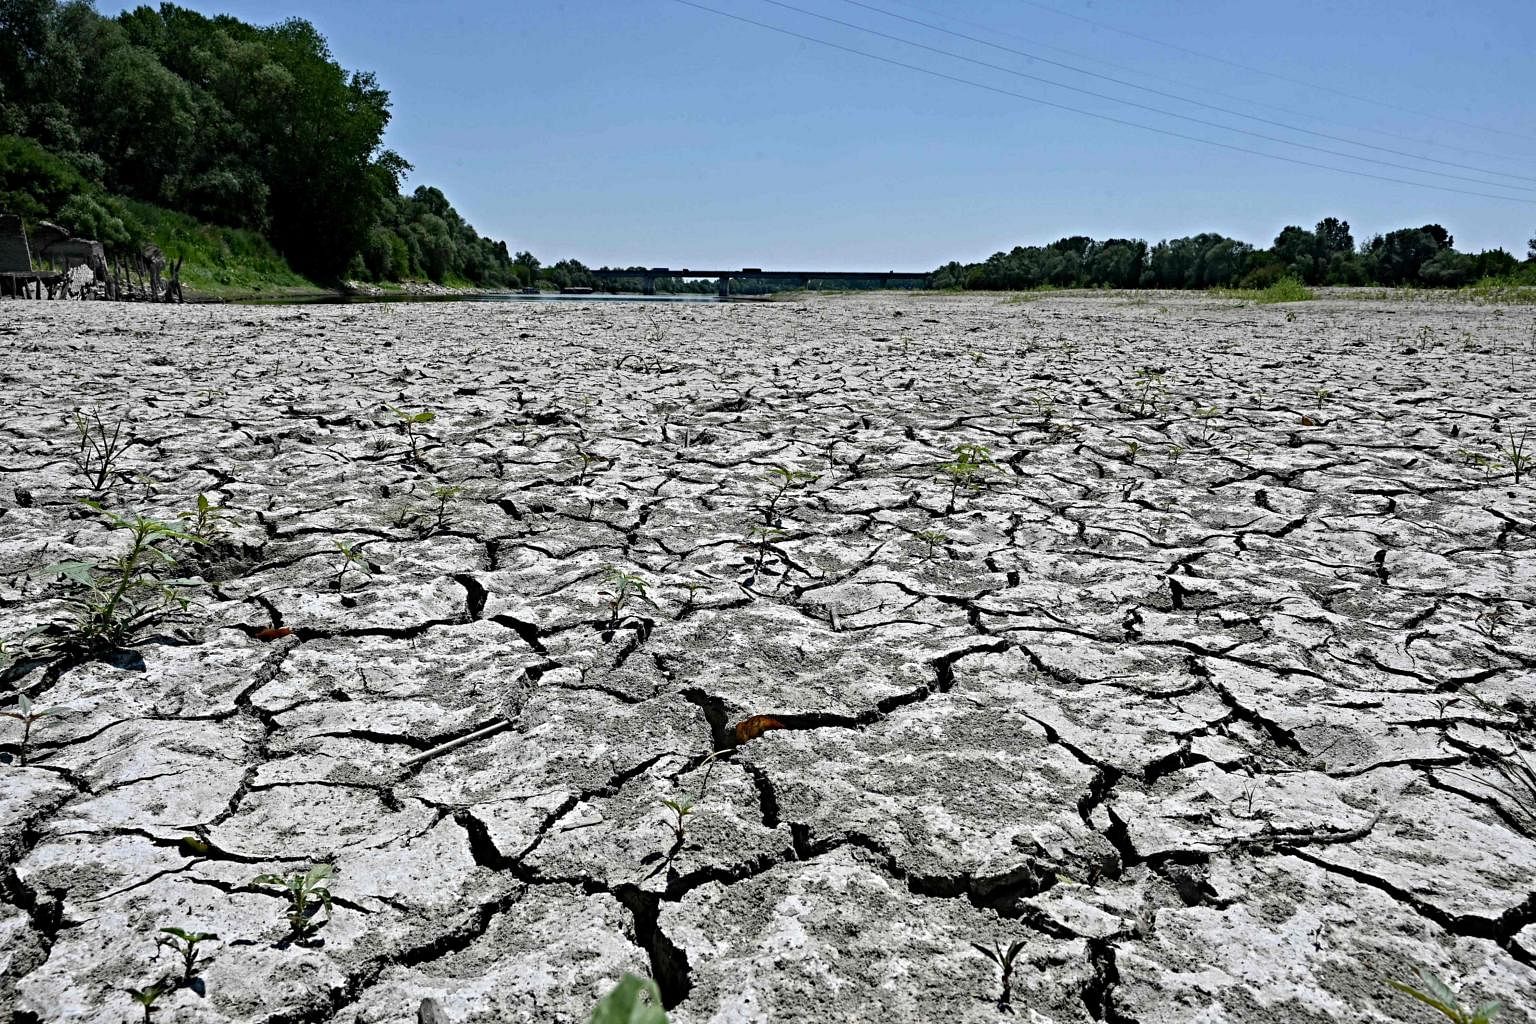 Historic drought threatens to cripple European trade | The Straits Times